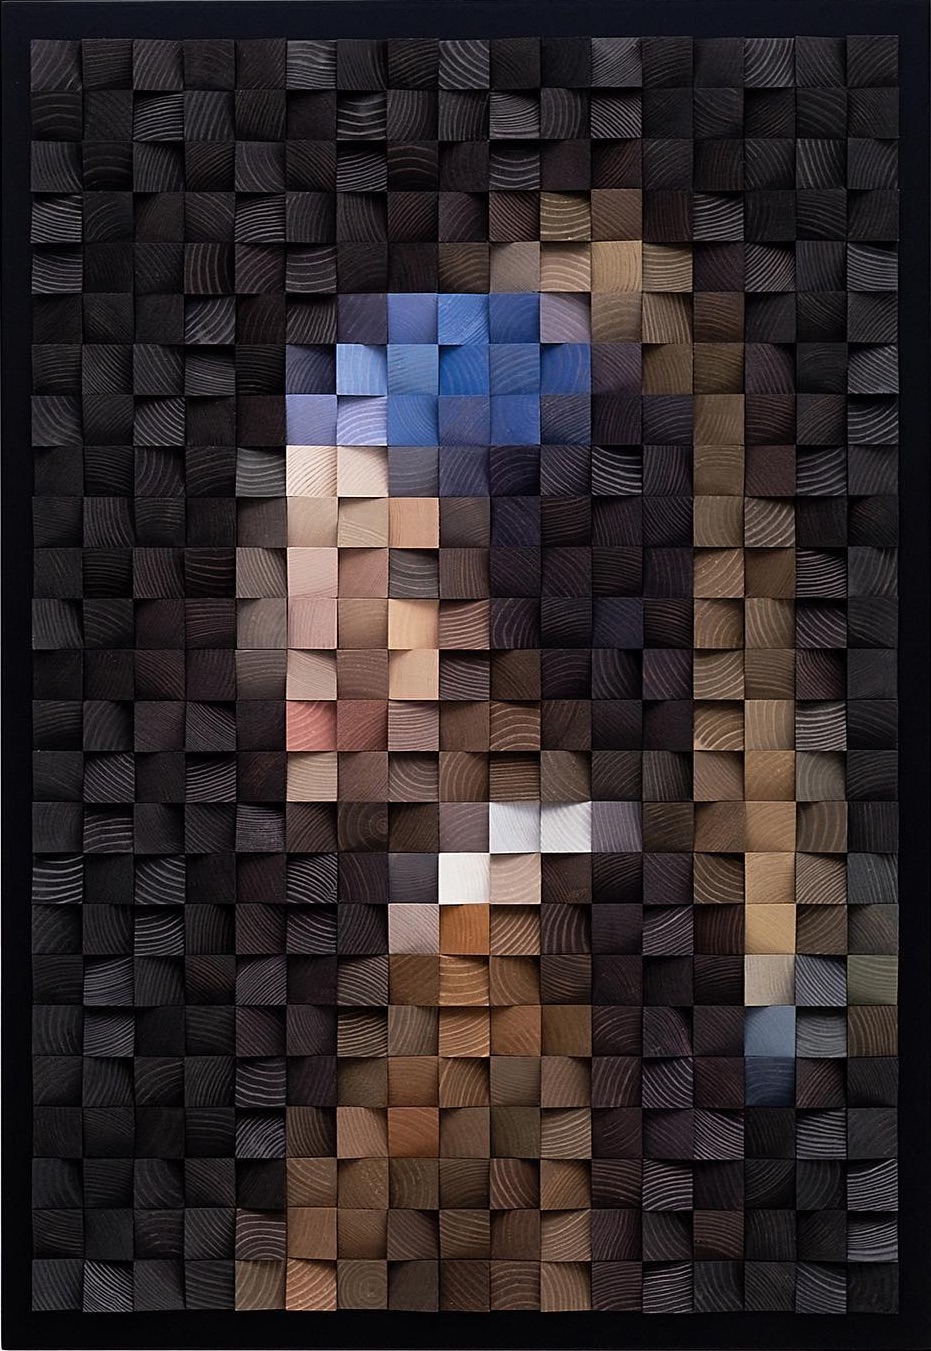 a chunky abstract representation of Vermeer's Girl with a Pearl Earring made from colorful wooden blocks